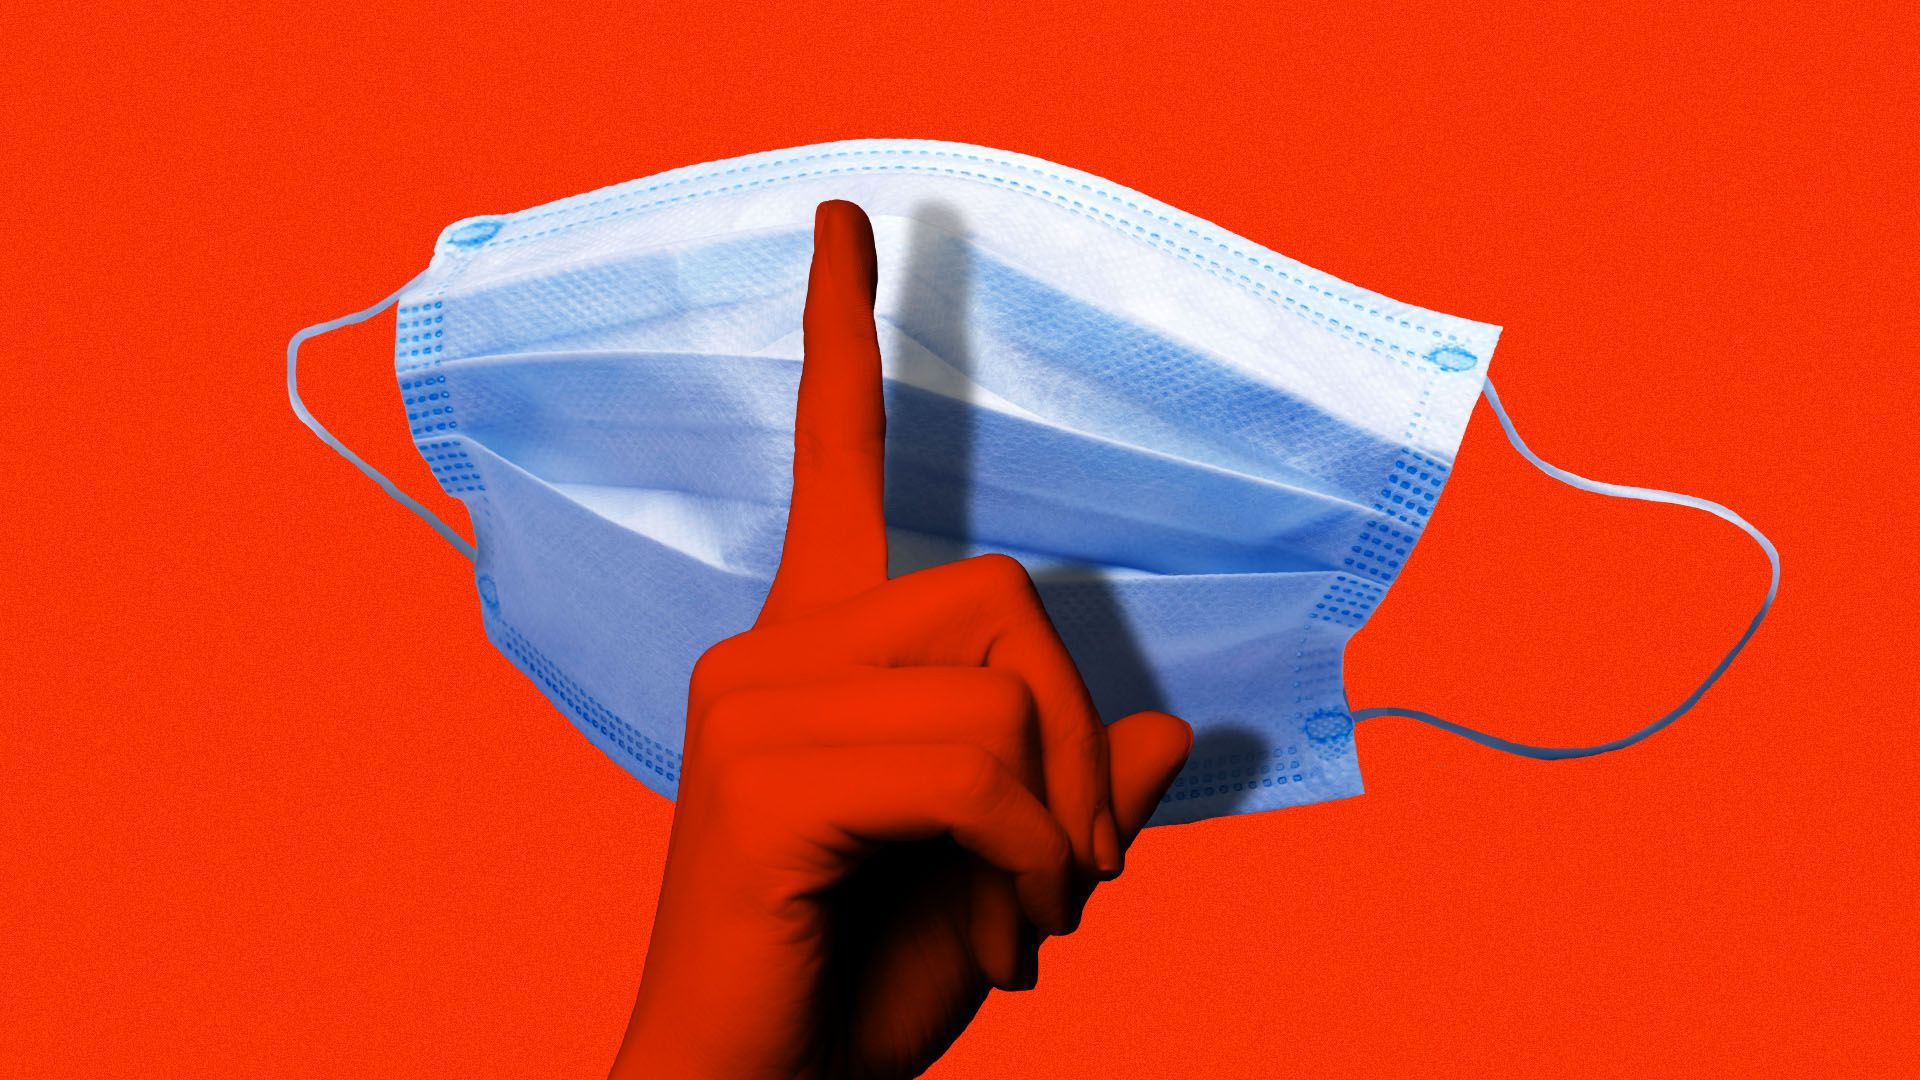 An illustration of a surgical mask with a finger making the "shh" signal in front of it.